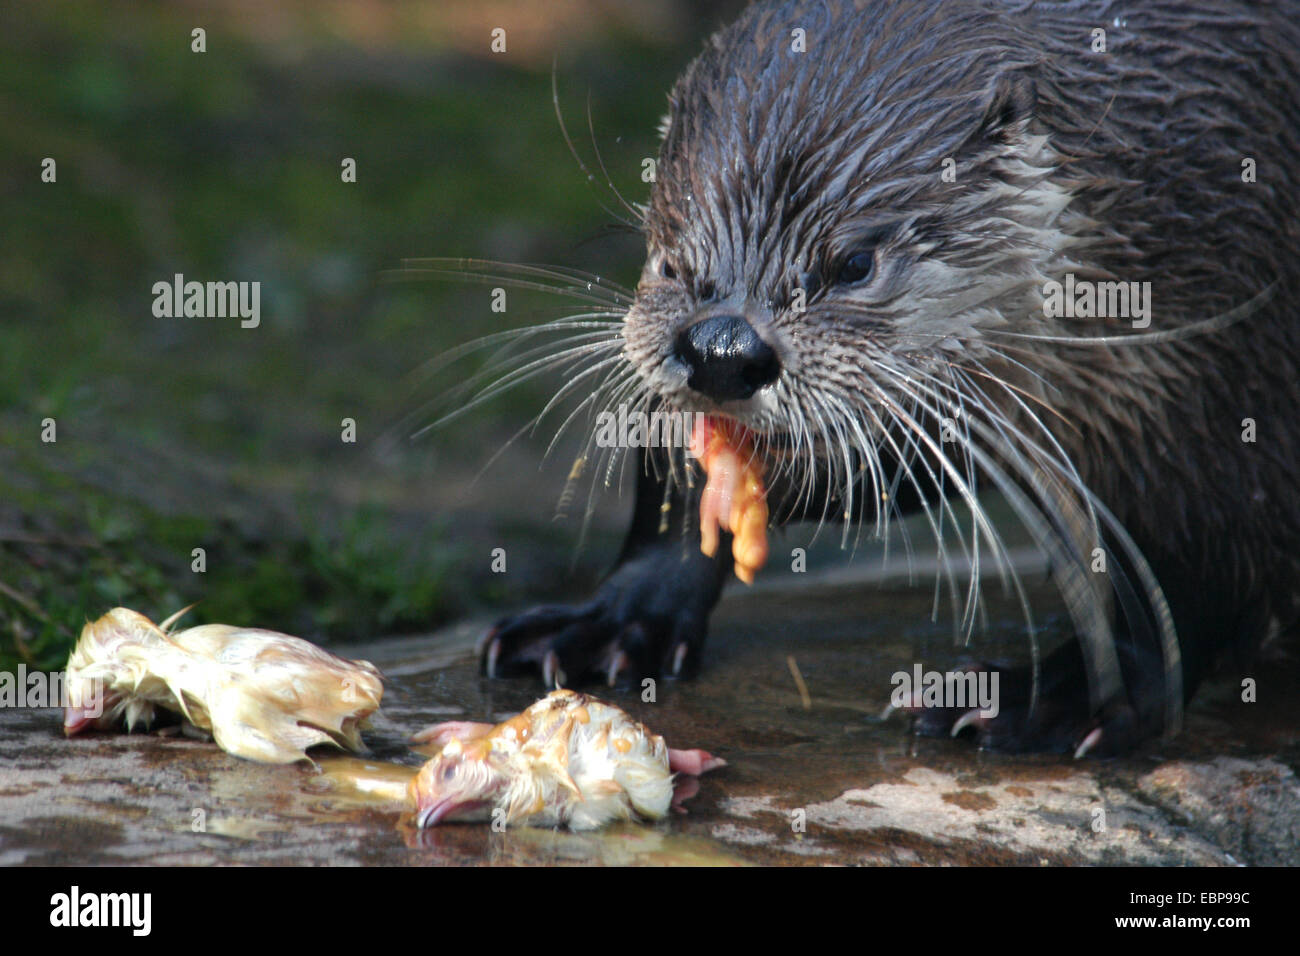 North American river otter (Lontra canadensis) eating chicken at Prague Zoo, Czech Republic. Stock Photo